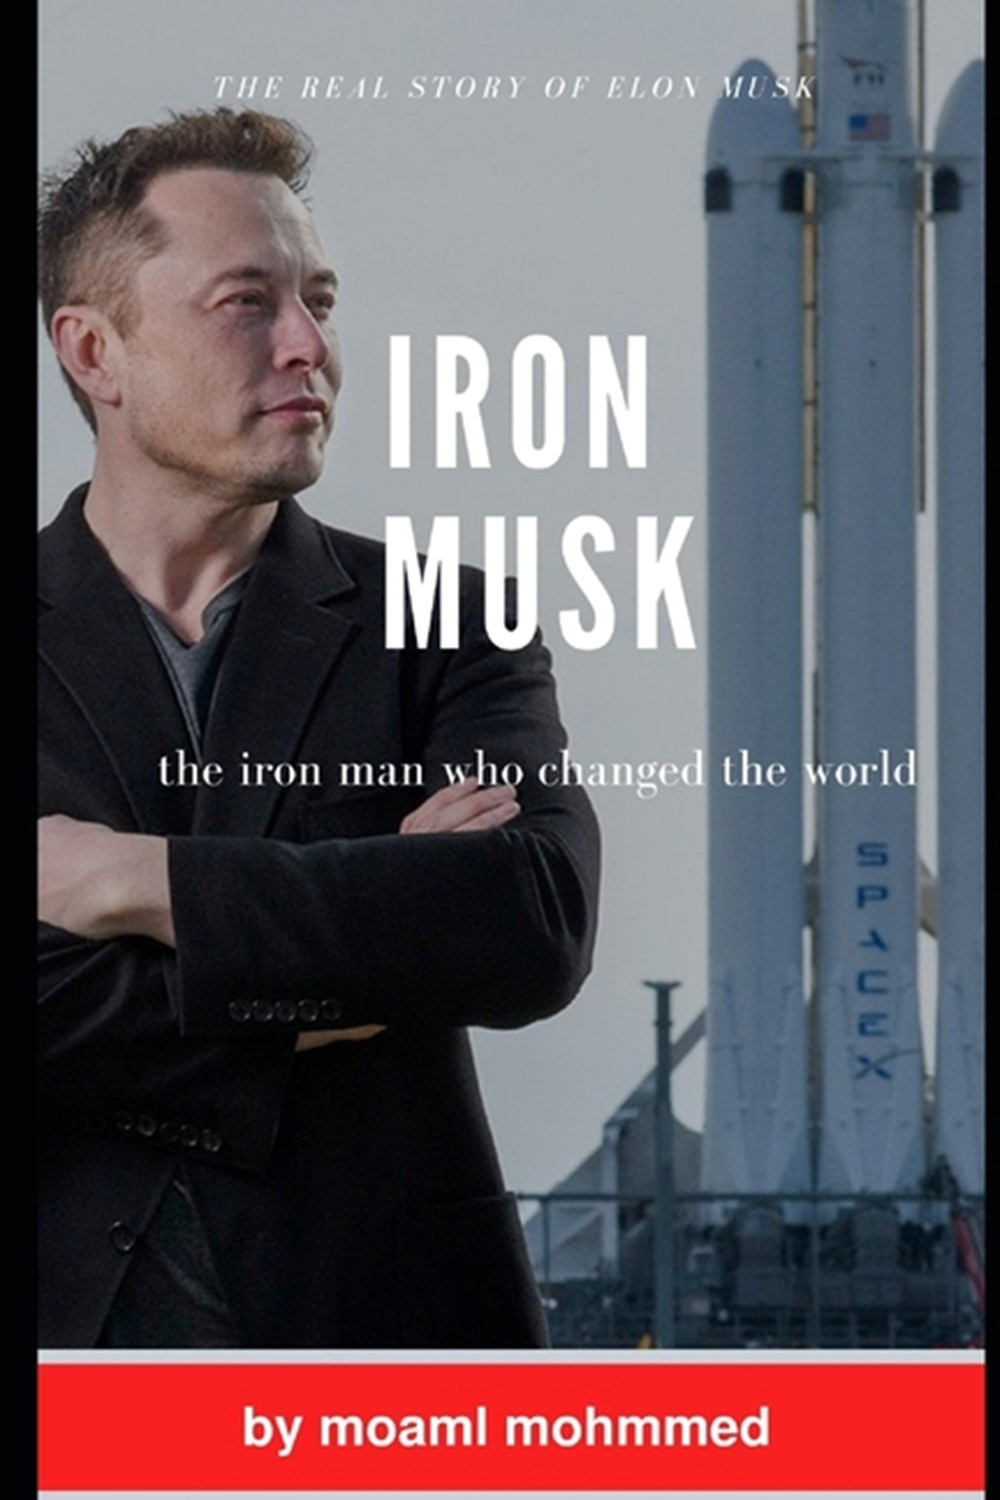 Iron musk the iron man who changed the world